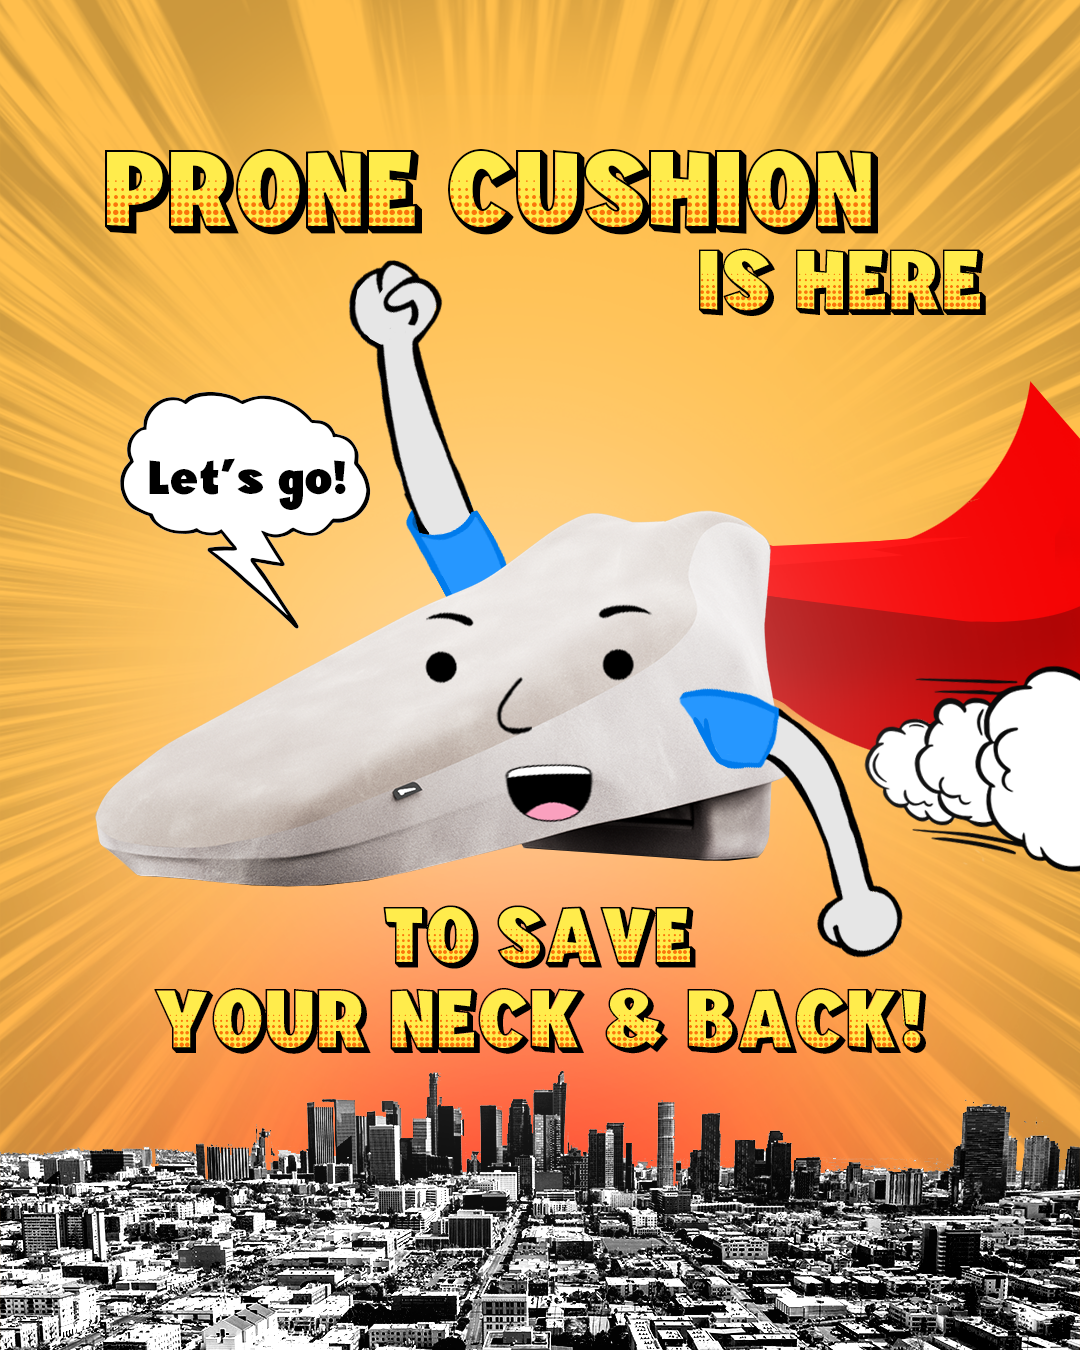 Prone Cushion saves your back